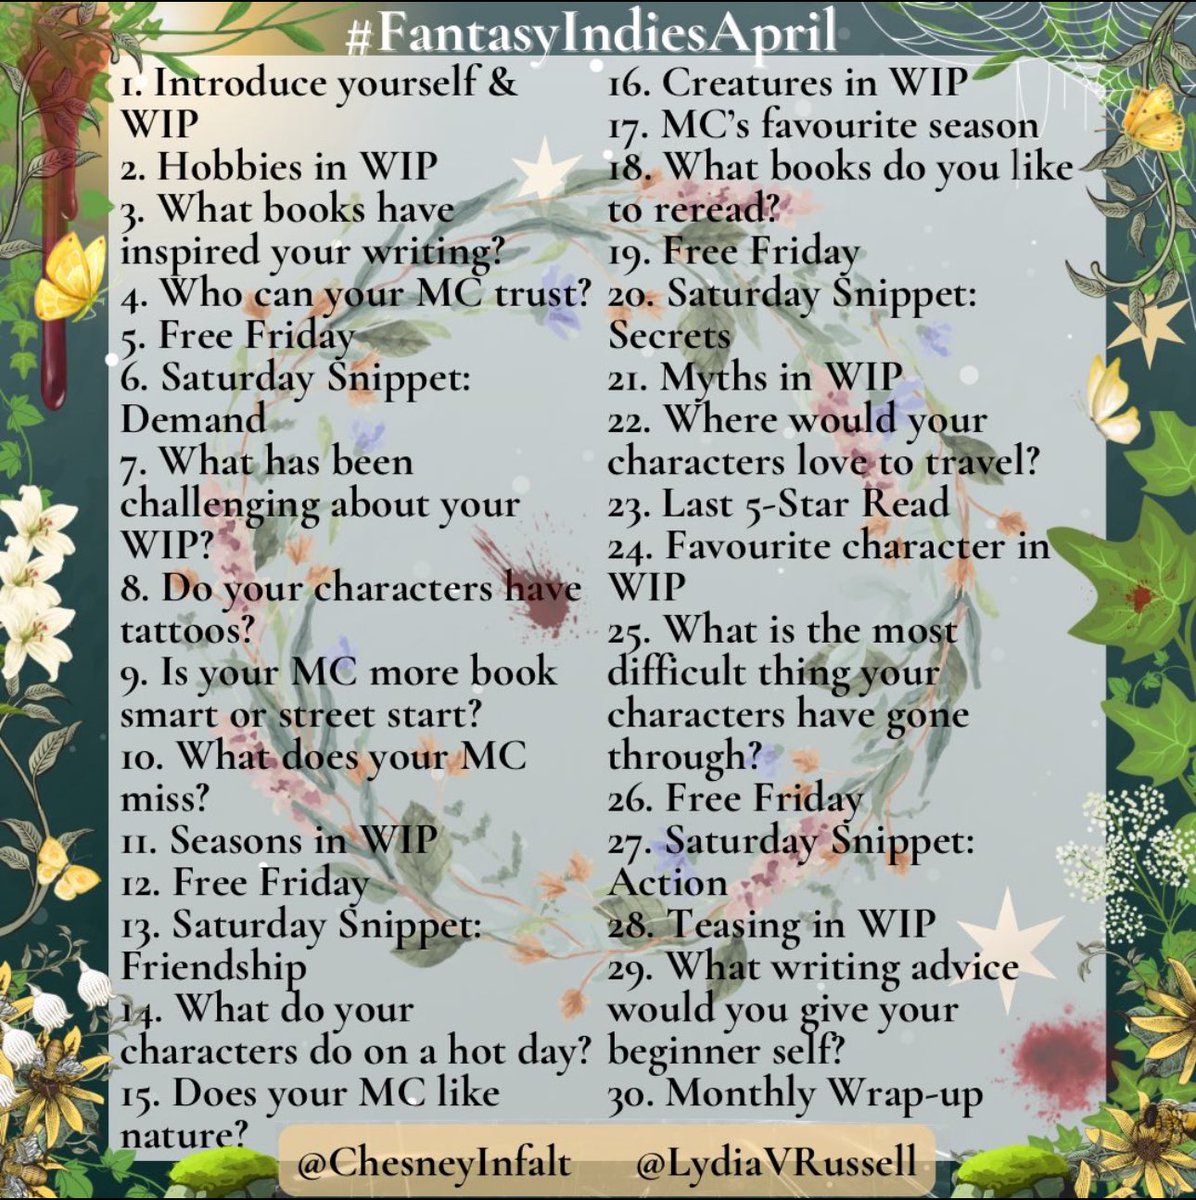 #FantasyIndiesApril Day 6 - Demand Faeland's Champion, Chapter 2 - A Dubious Invitation Garlan & Elias have infiltrated the mansion of a strange nobleman who Elias believes has kidnapped his sister. They try to get a secret key from the animated portraits which keep it safe.